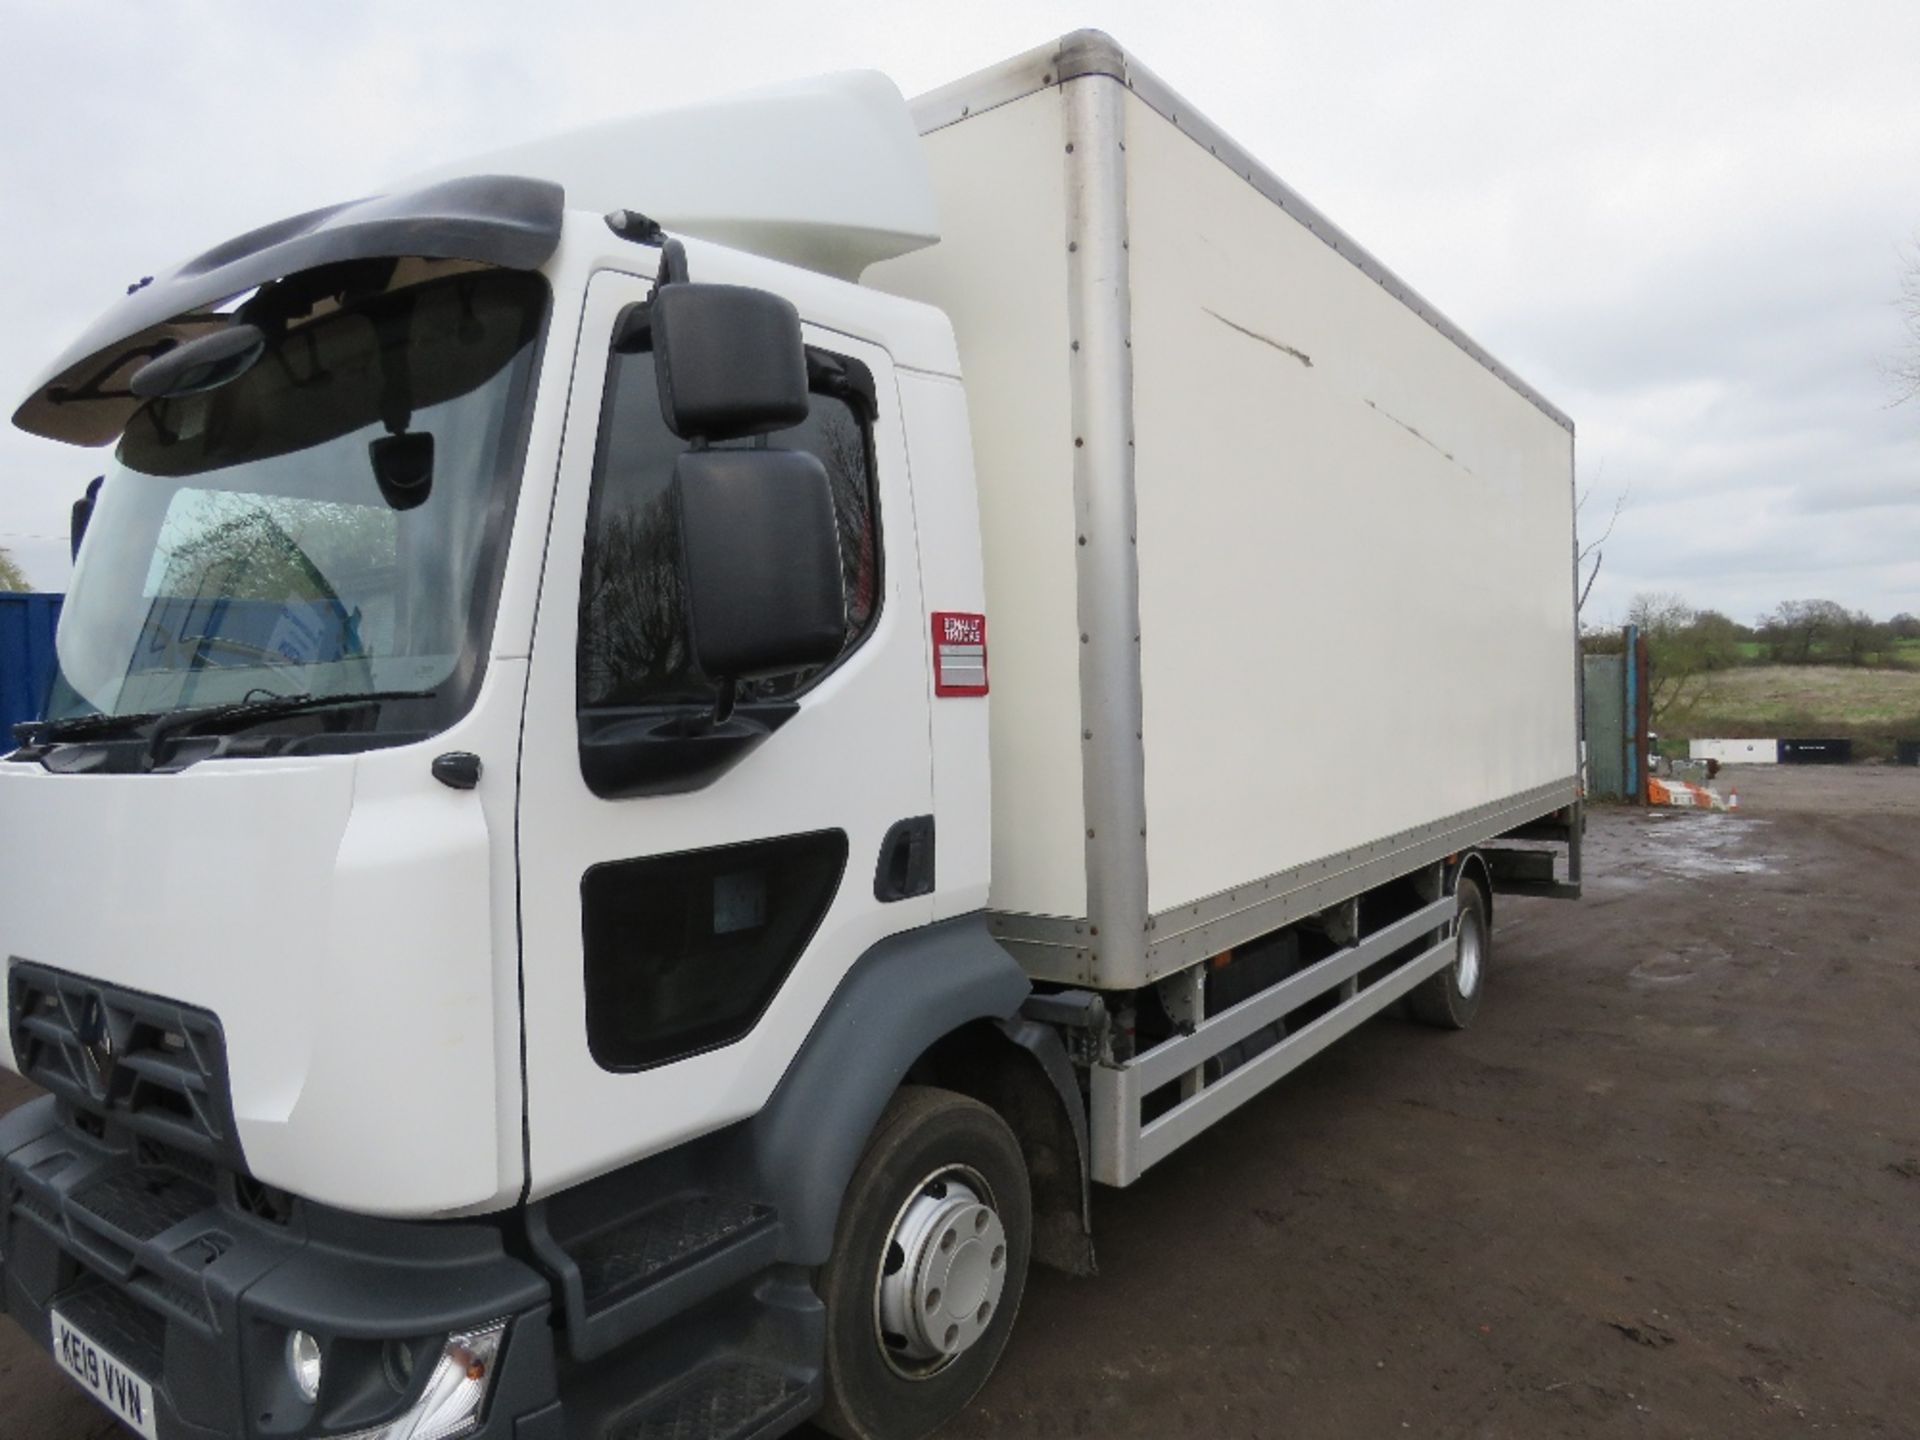 RENAULT D75 BOX LORRY REG:KE19 VVN. 7500KG RATED, DIRECT FROM LOCAL COMPANY WHO ARE SELLING DUE TO A